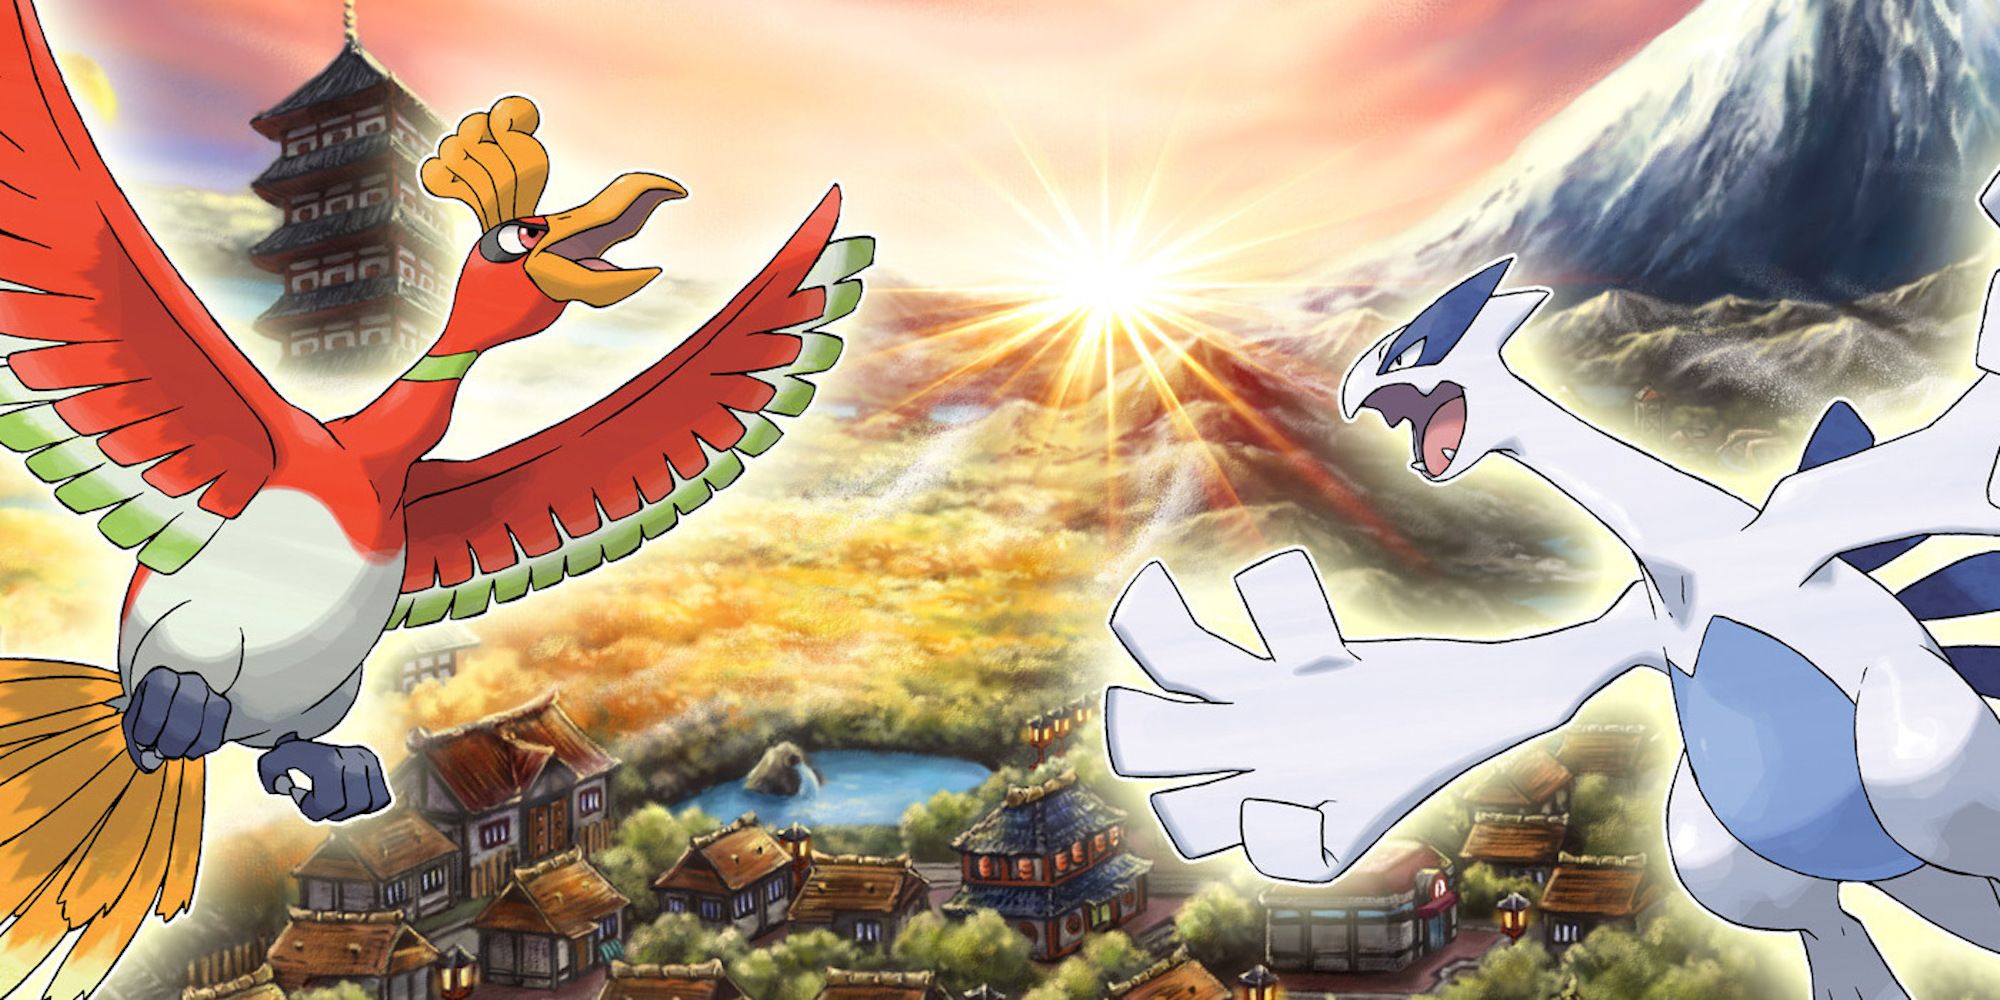 Ho-Oh and Lugia from Pokemon Gold/Silver